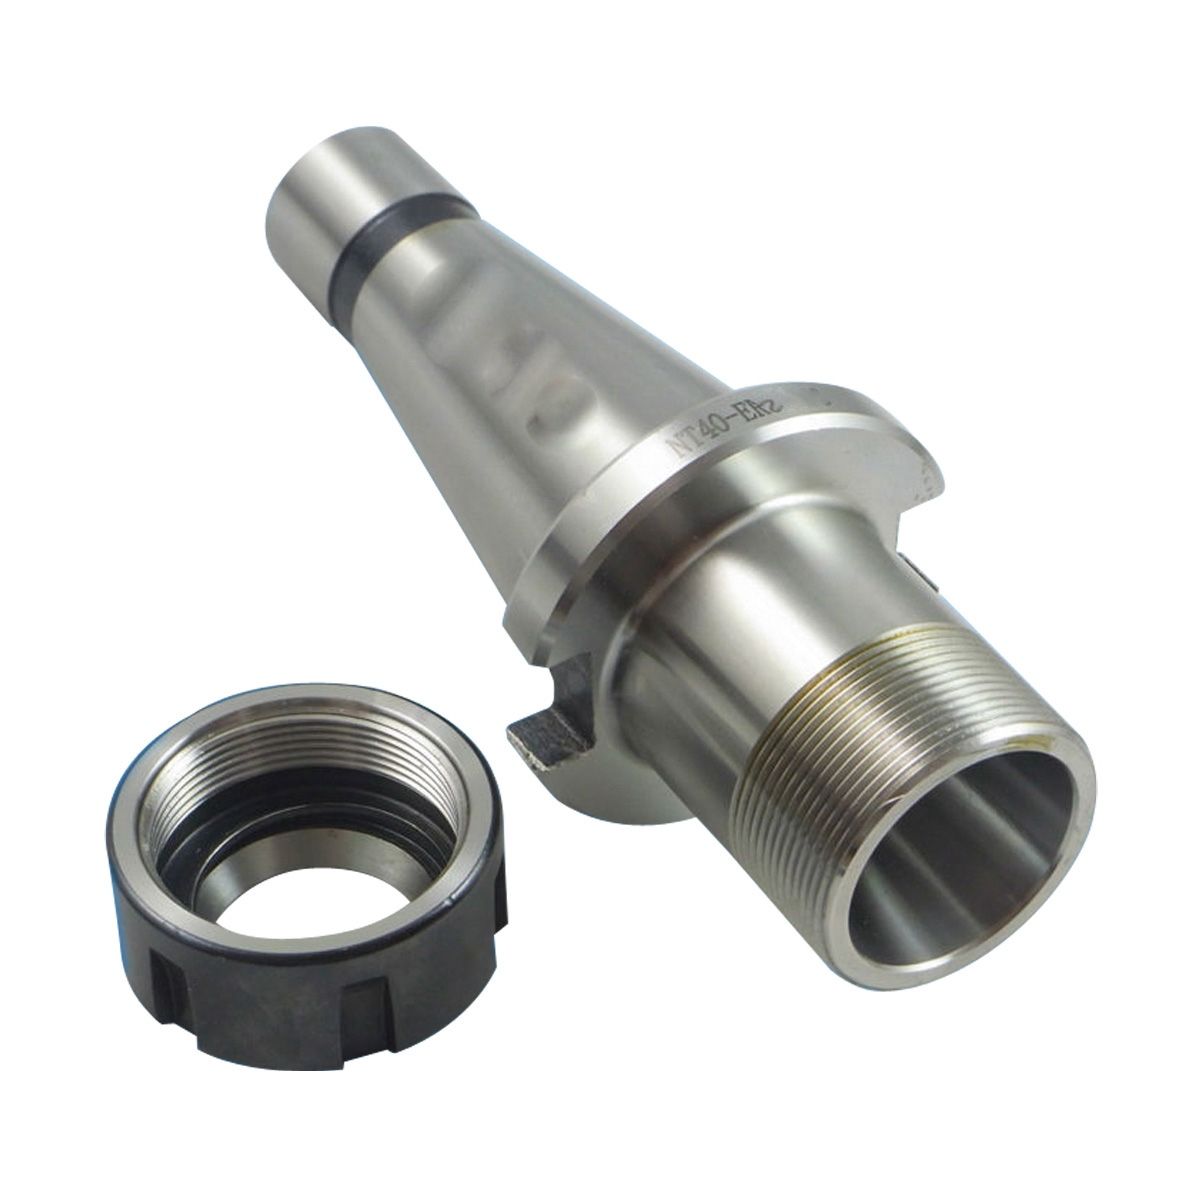 PRO-SERIES #40 NMTB ER-40 COLLET CHUCK WITH DRAWBAR END (3901-5091)